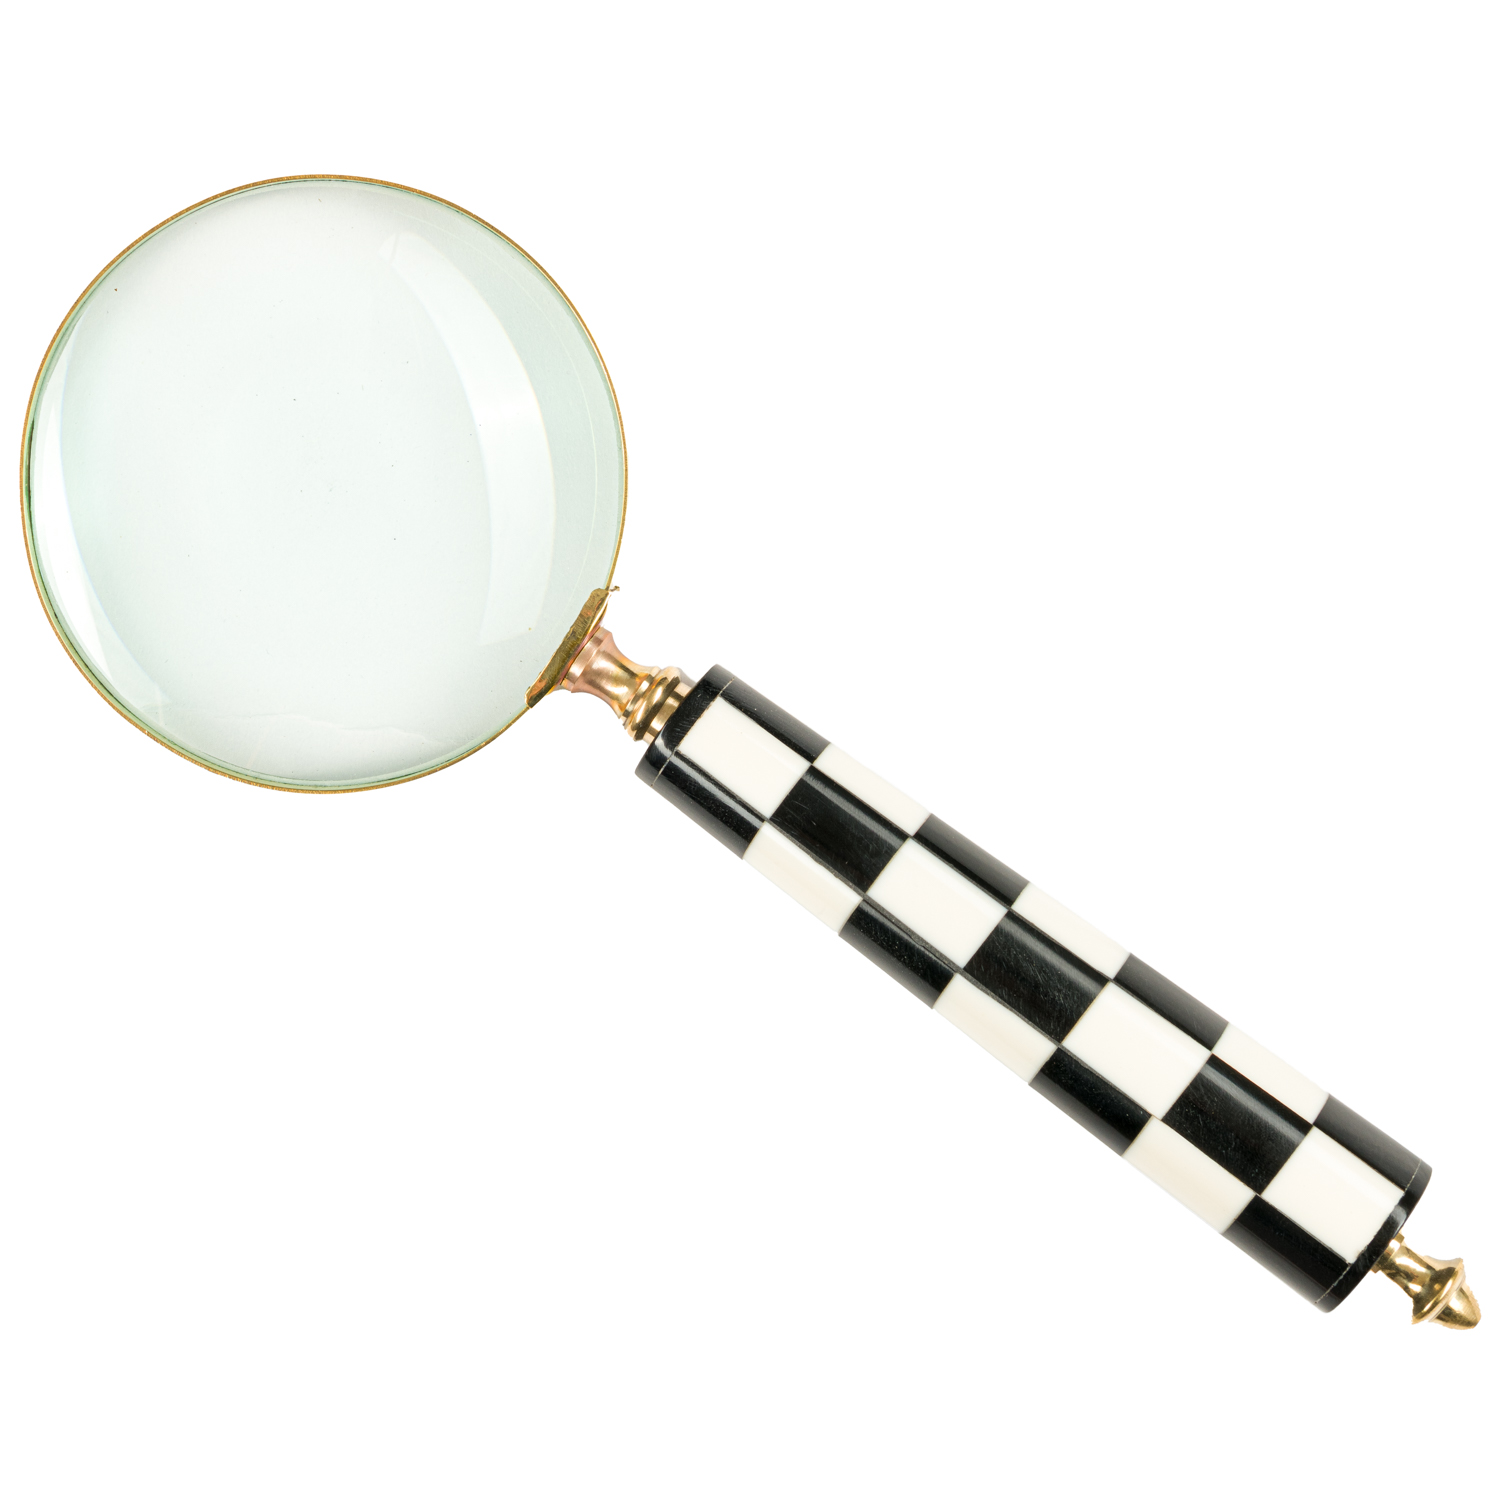 Large Horn Cheque Magnifying Glass - Image 1